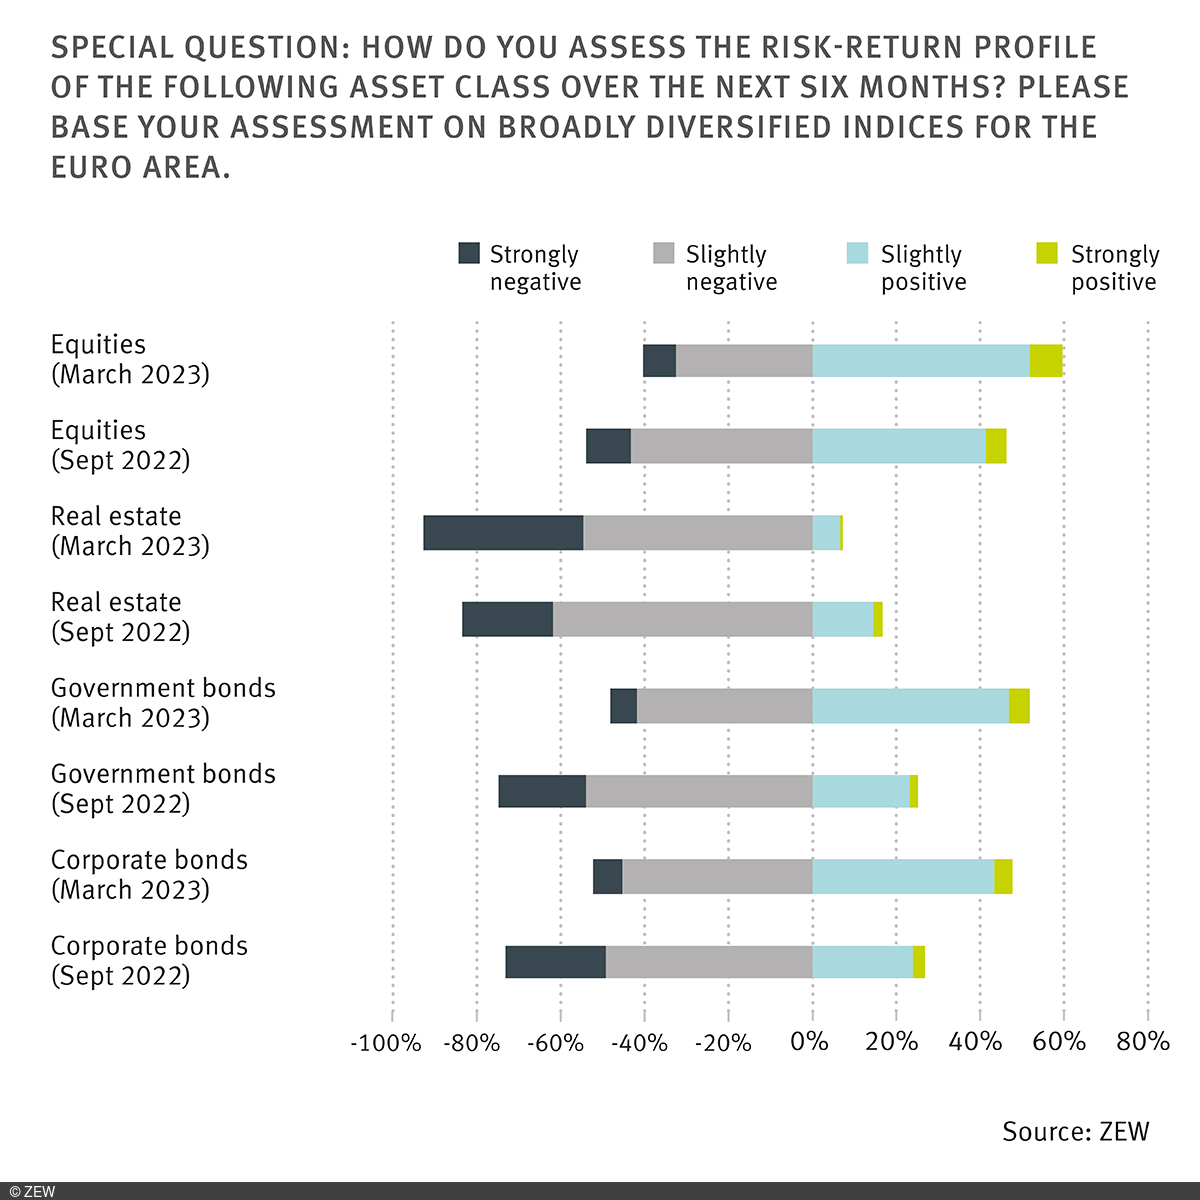 Chart illustrating the experts' assessments of various asset classes